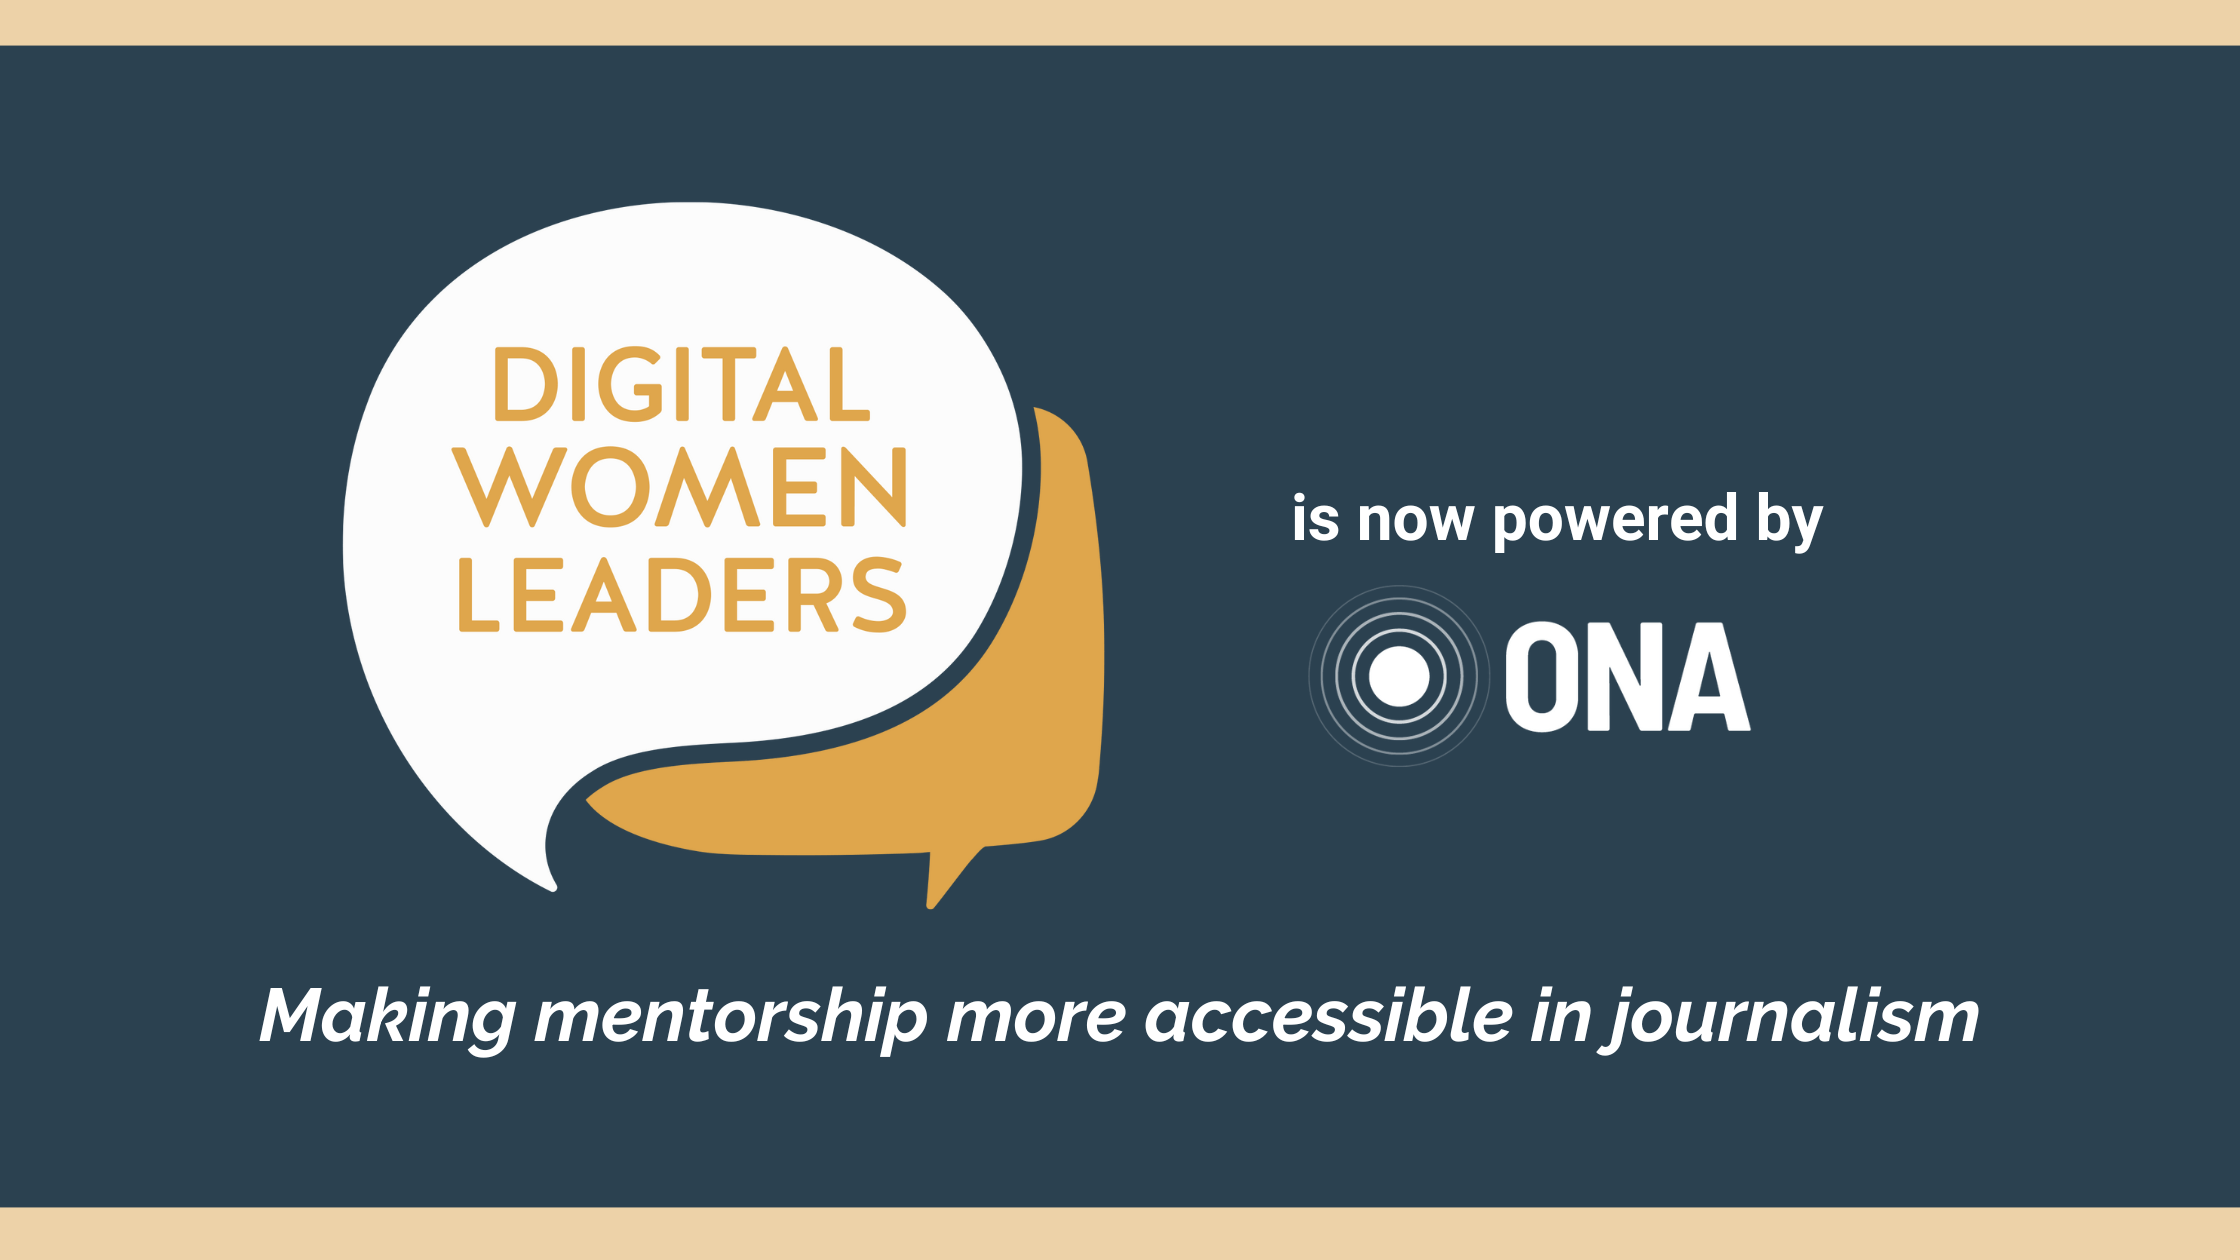 Two logos indicating DWL is now powered by ONA. Text below the logos reads "Making mentorship more accessible in journalism"